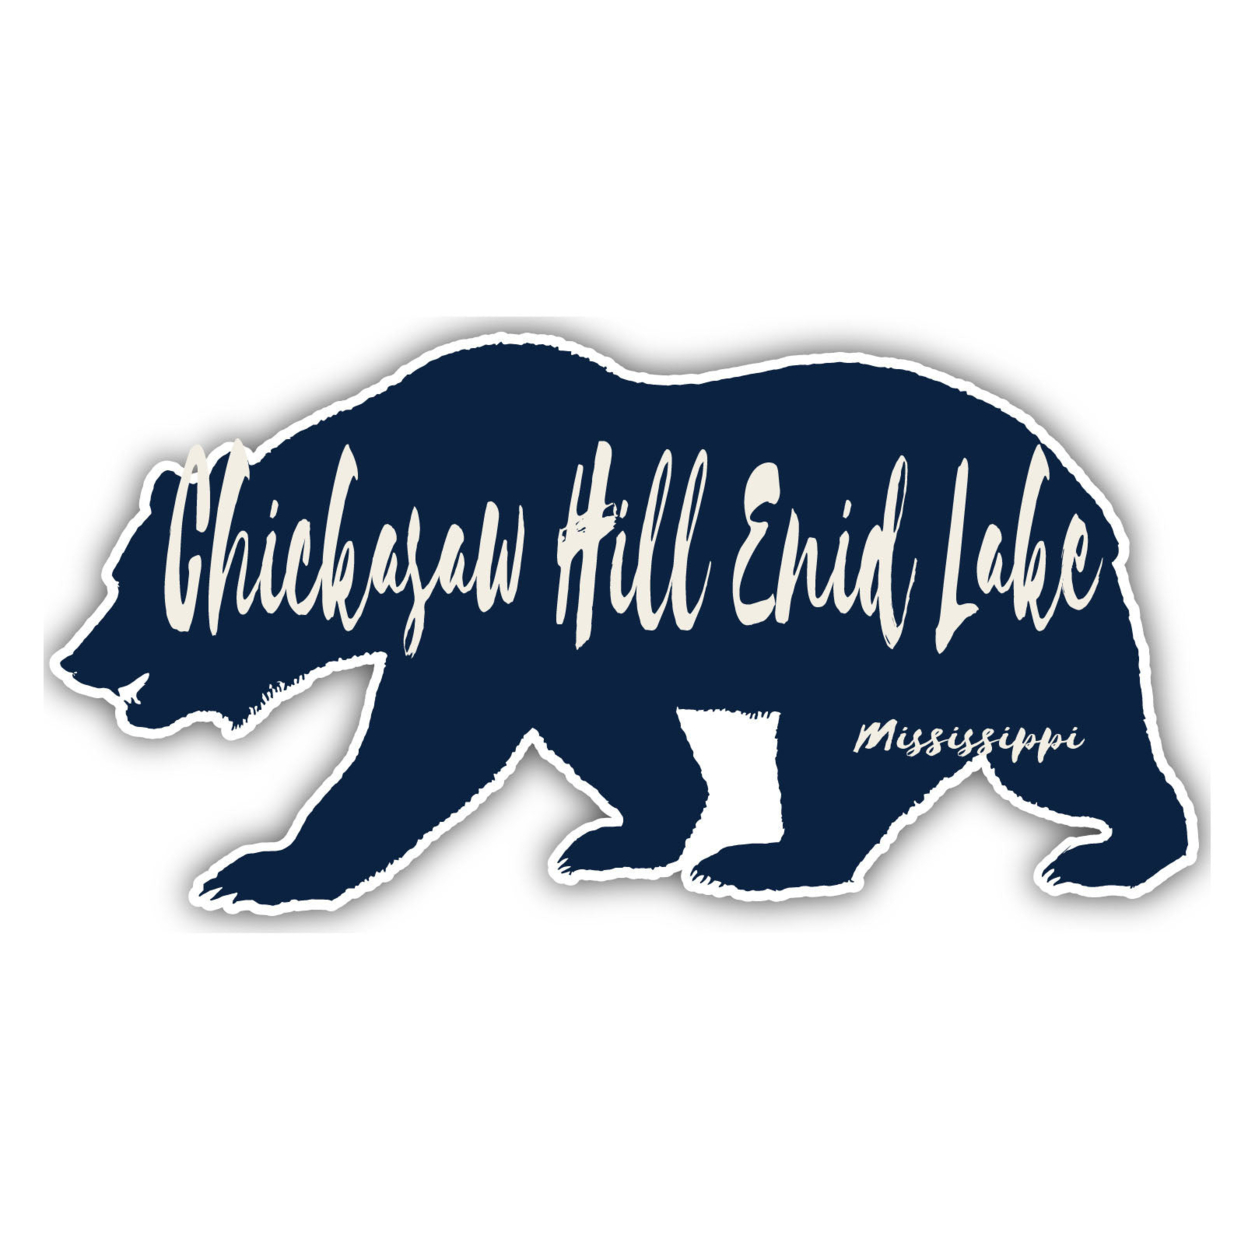 Chickasaw Hill Enid Lake Mississippi Souvenir Decorative Stickers (Choose Theme And Size) - 4-Pack, 10-Inch, Bear